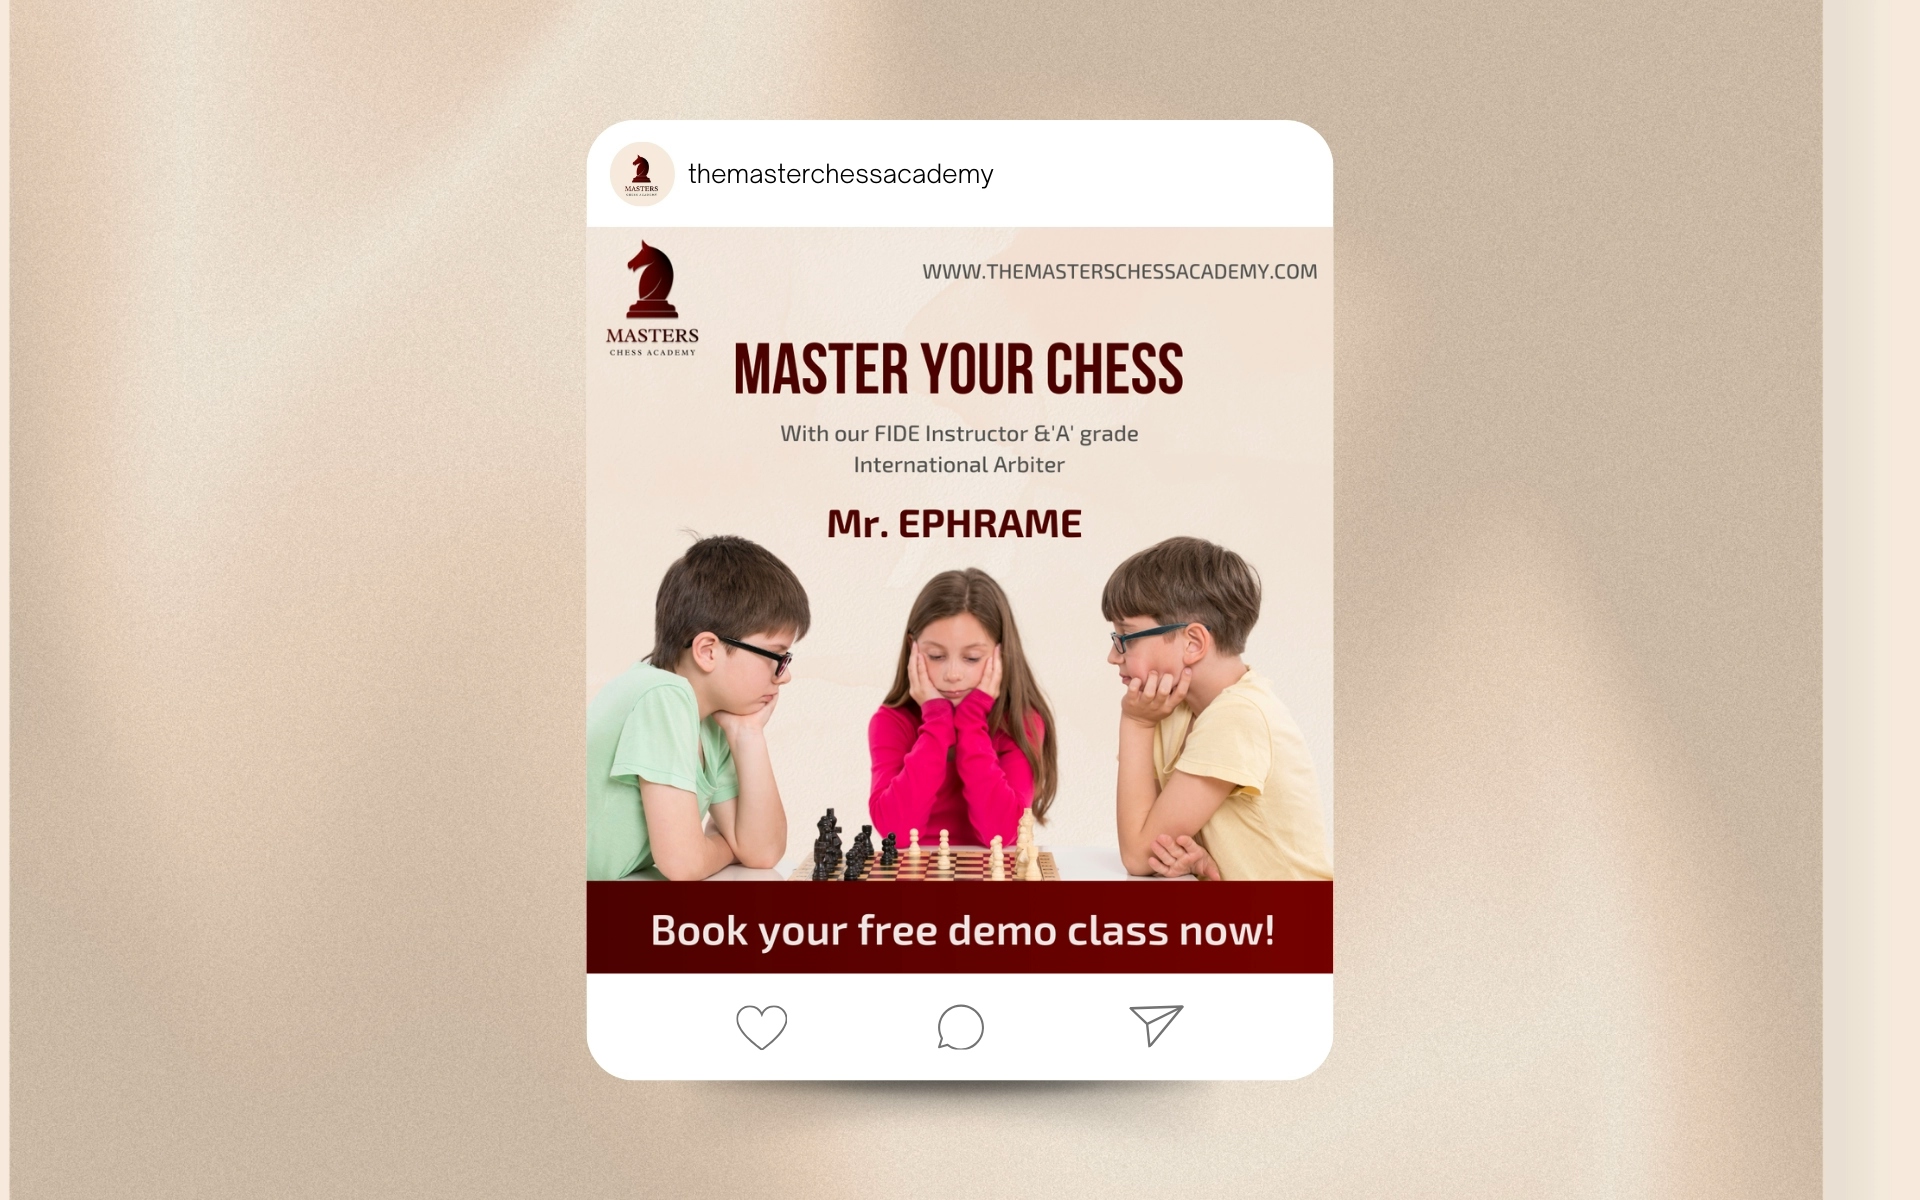 Social Media Handling for Masters Chess Academy by Hion Studios